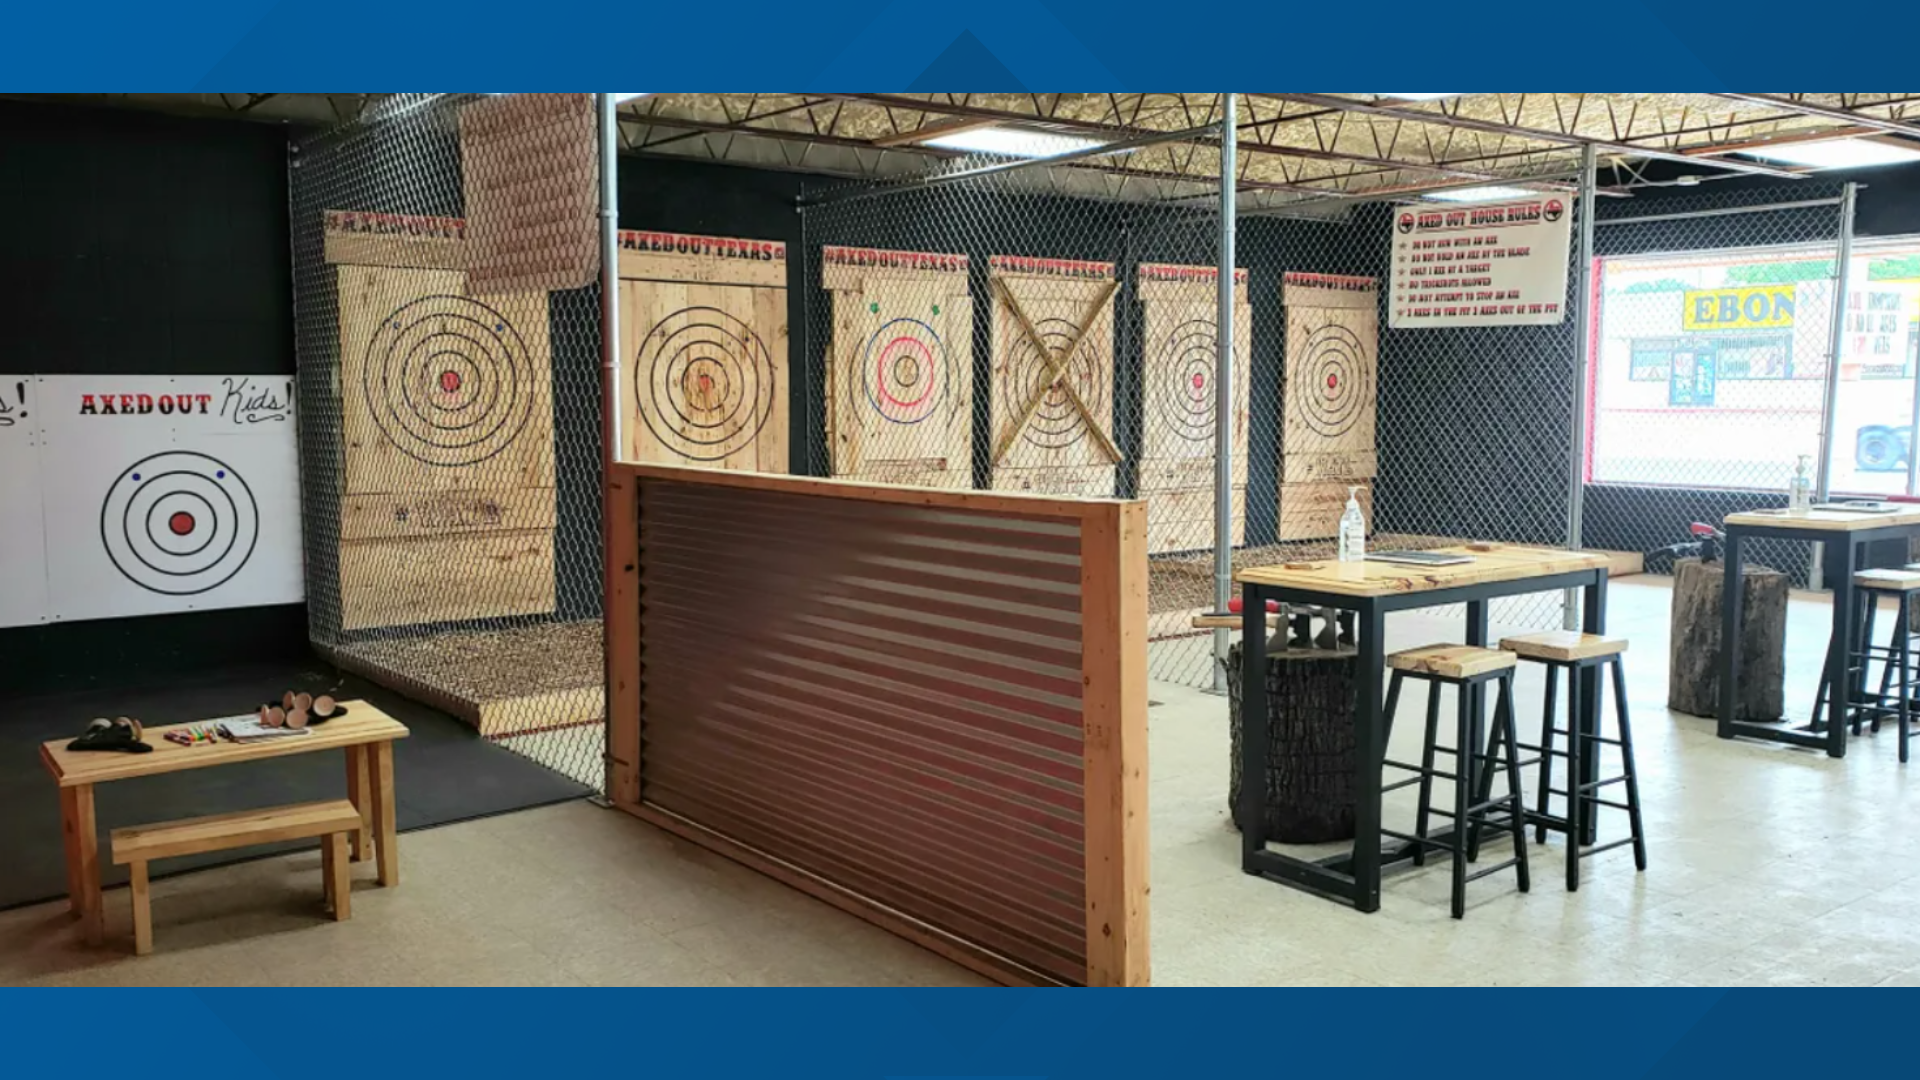 Six axe throwers from Axed Out Texas competed in Atlanta at the World Axe Throwing League U.S. Open.